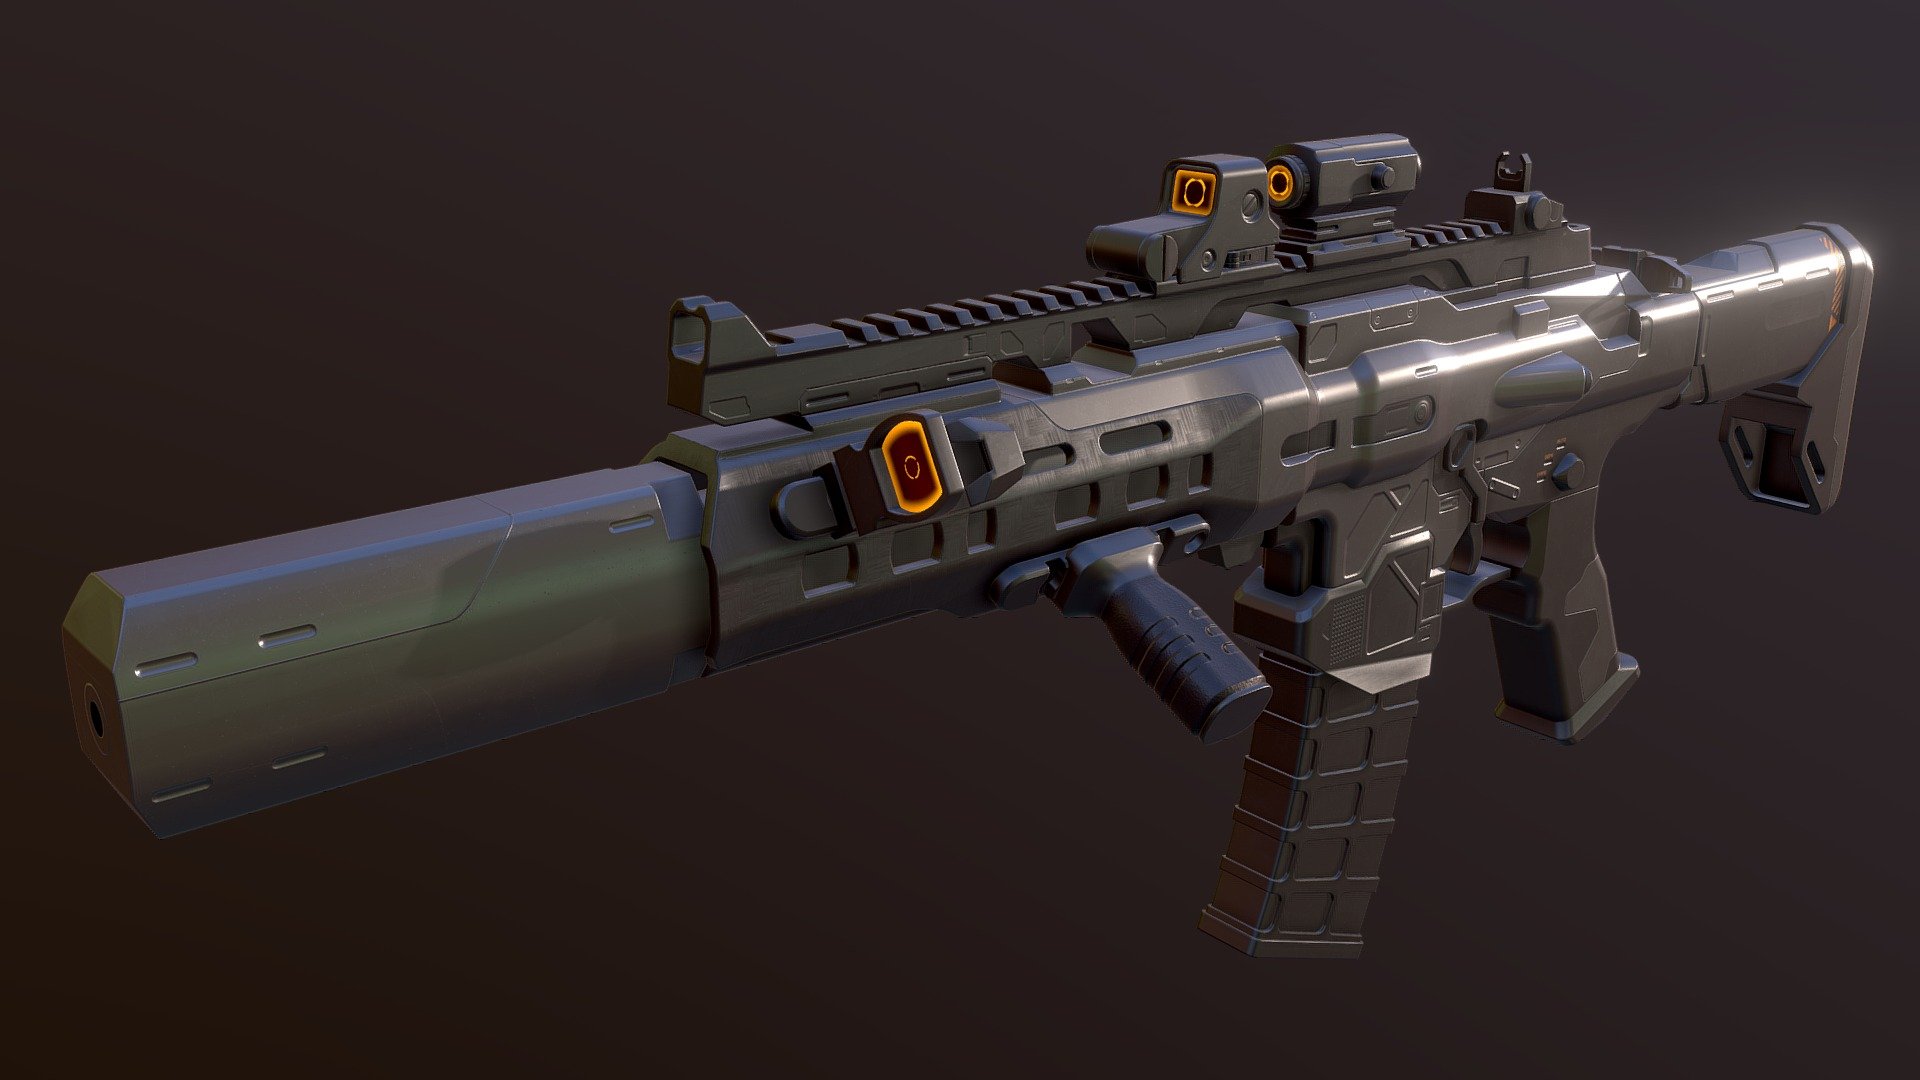 A sci-fi assault rifle model I made during my free time.

Blender + Substance Painter. 2k textures, 5 sets 3d model